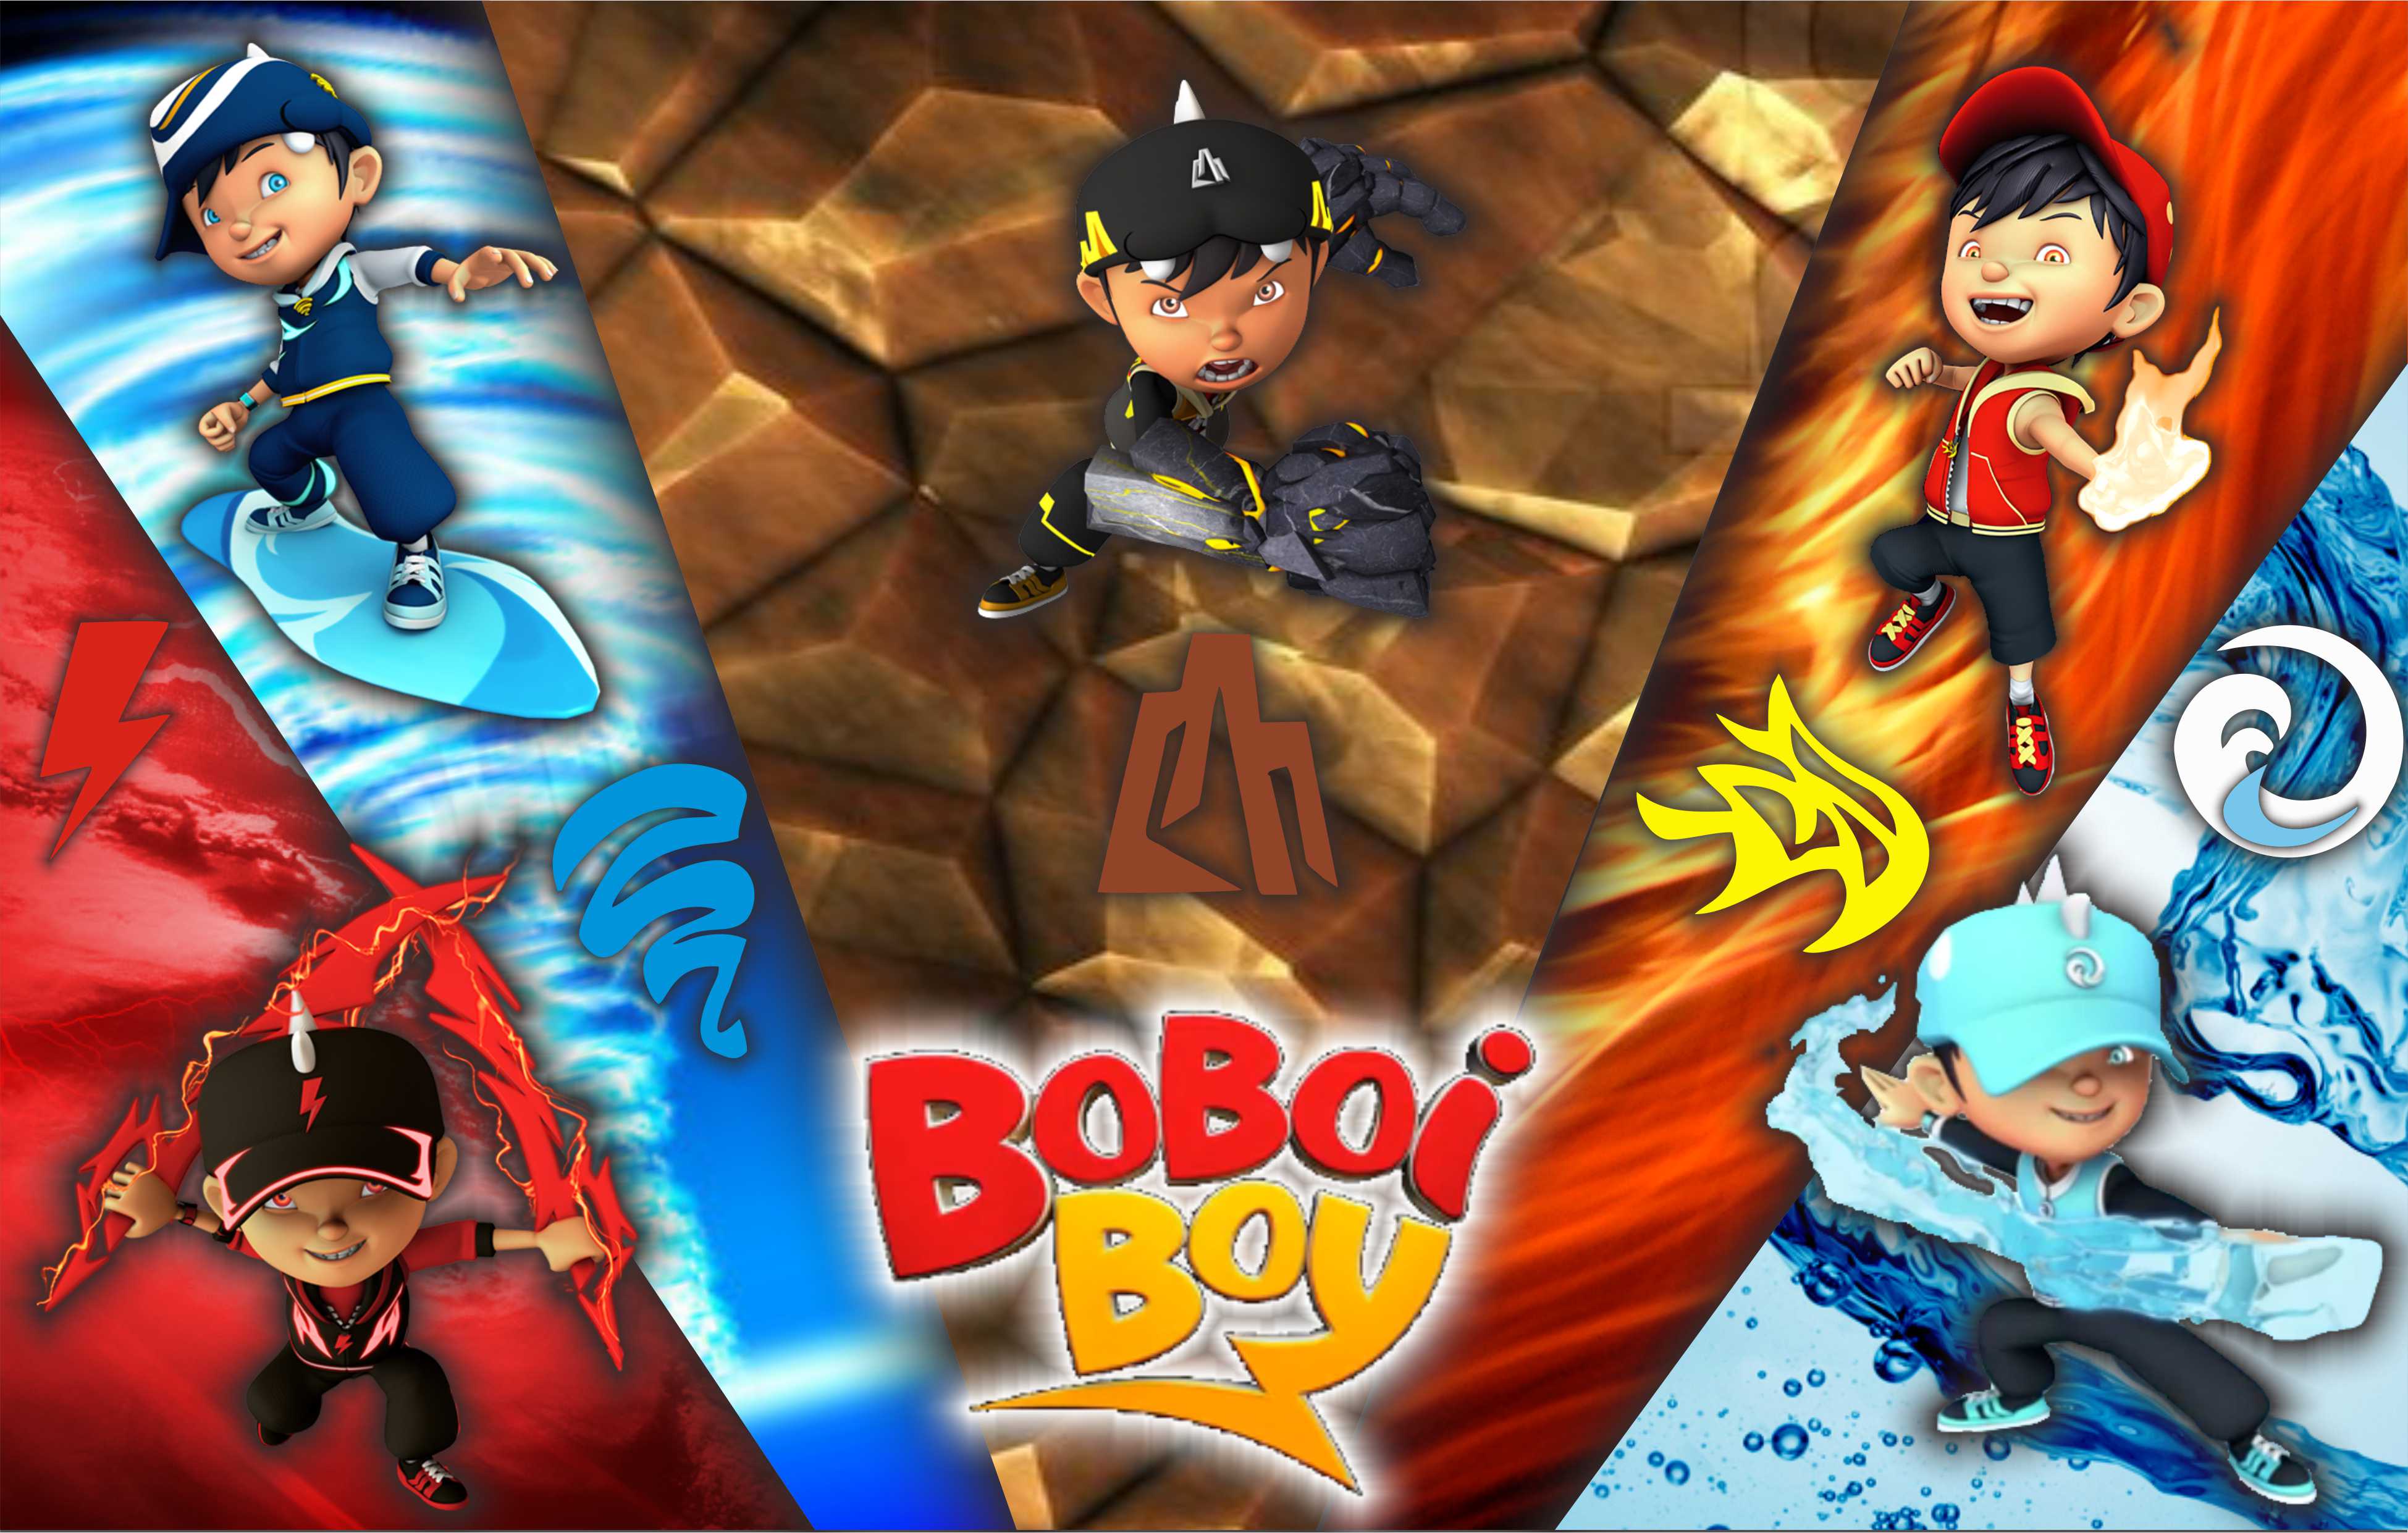 download boboiboy the movie hd